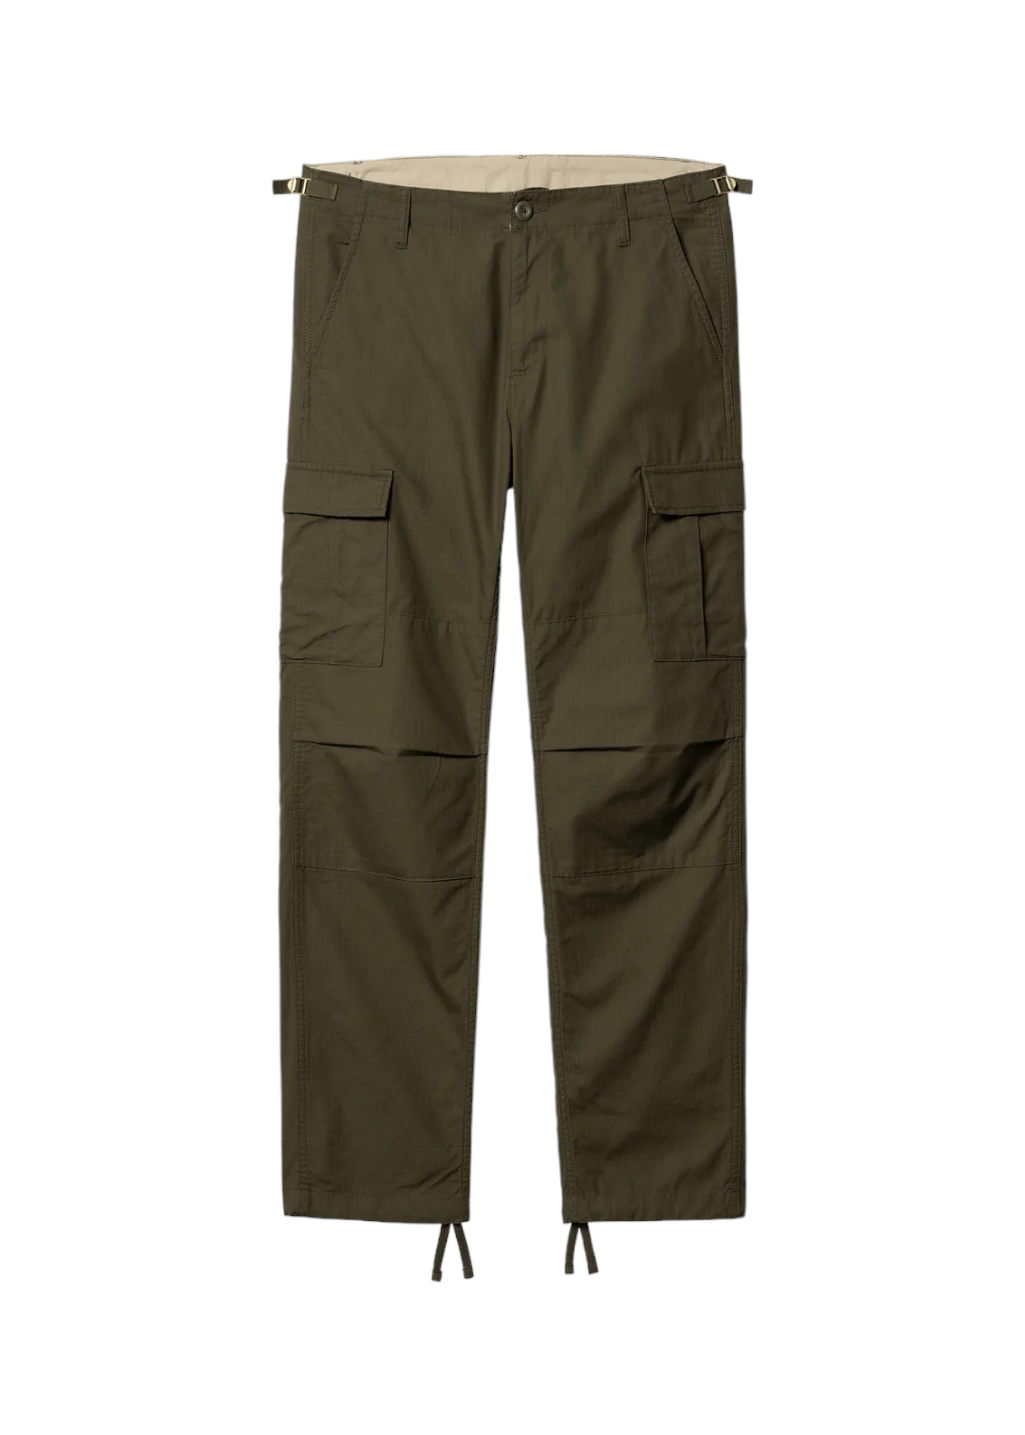 Carhartt WIP - W' Master Pant - Leather Rinsed